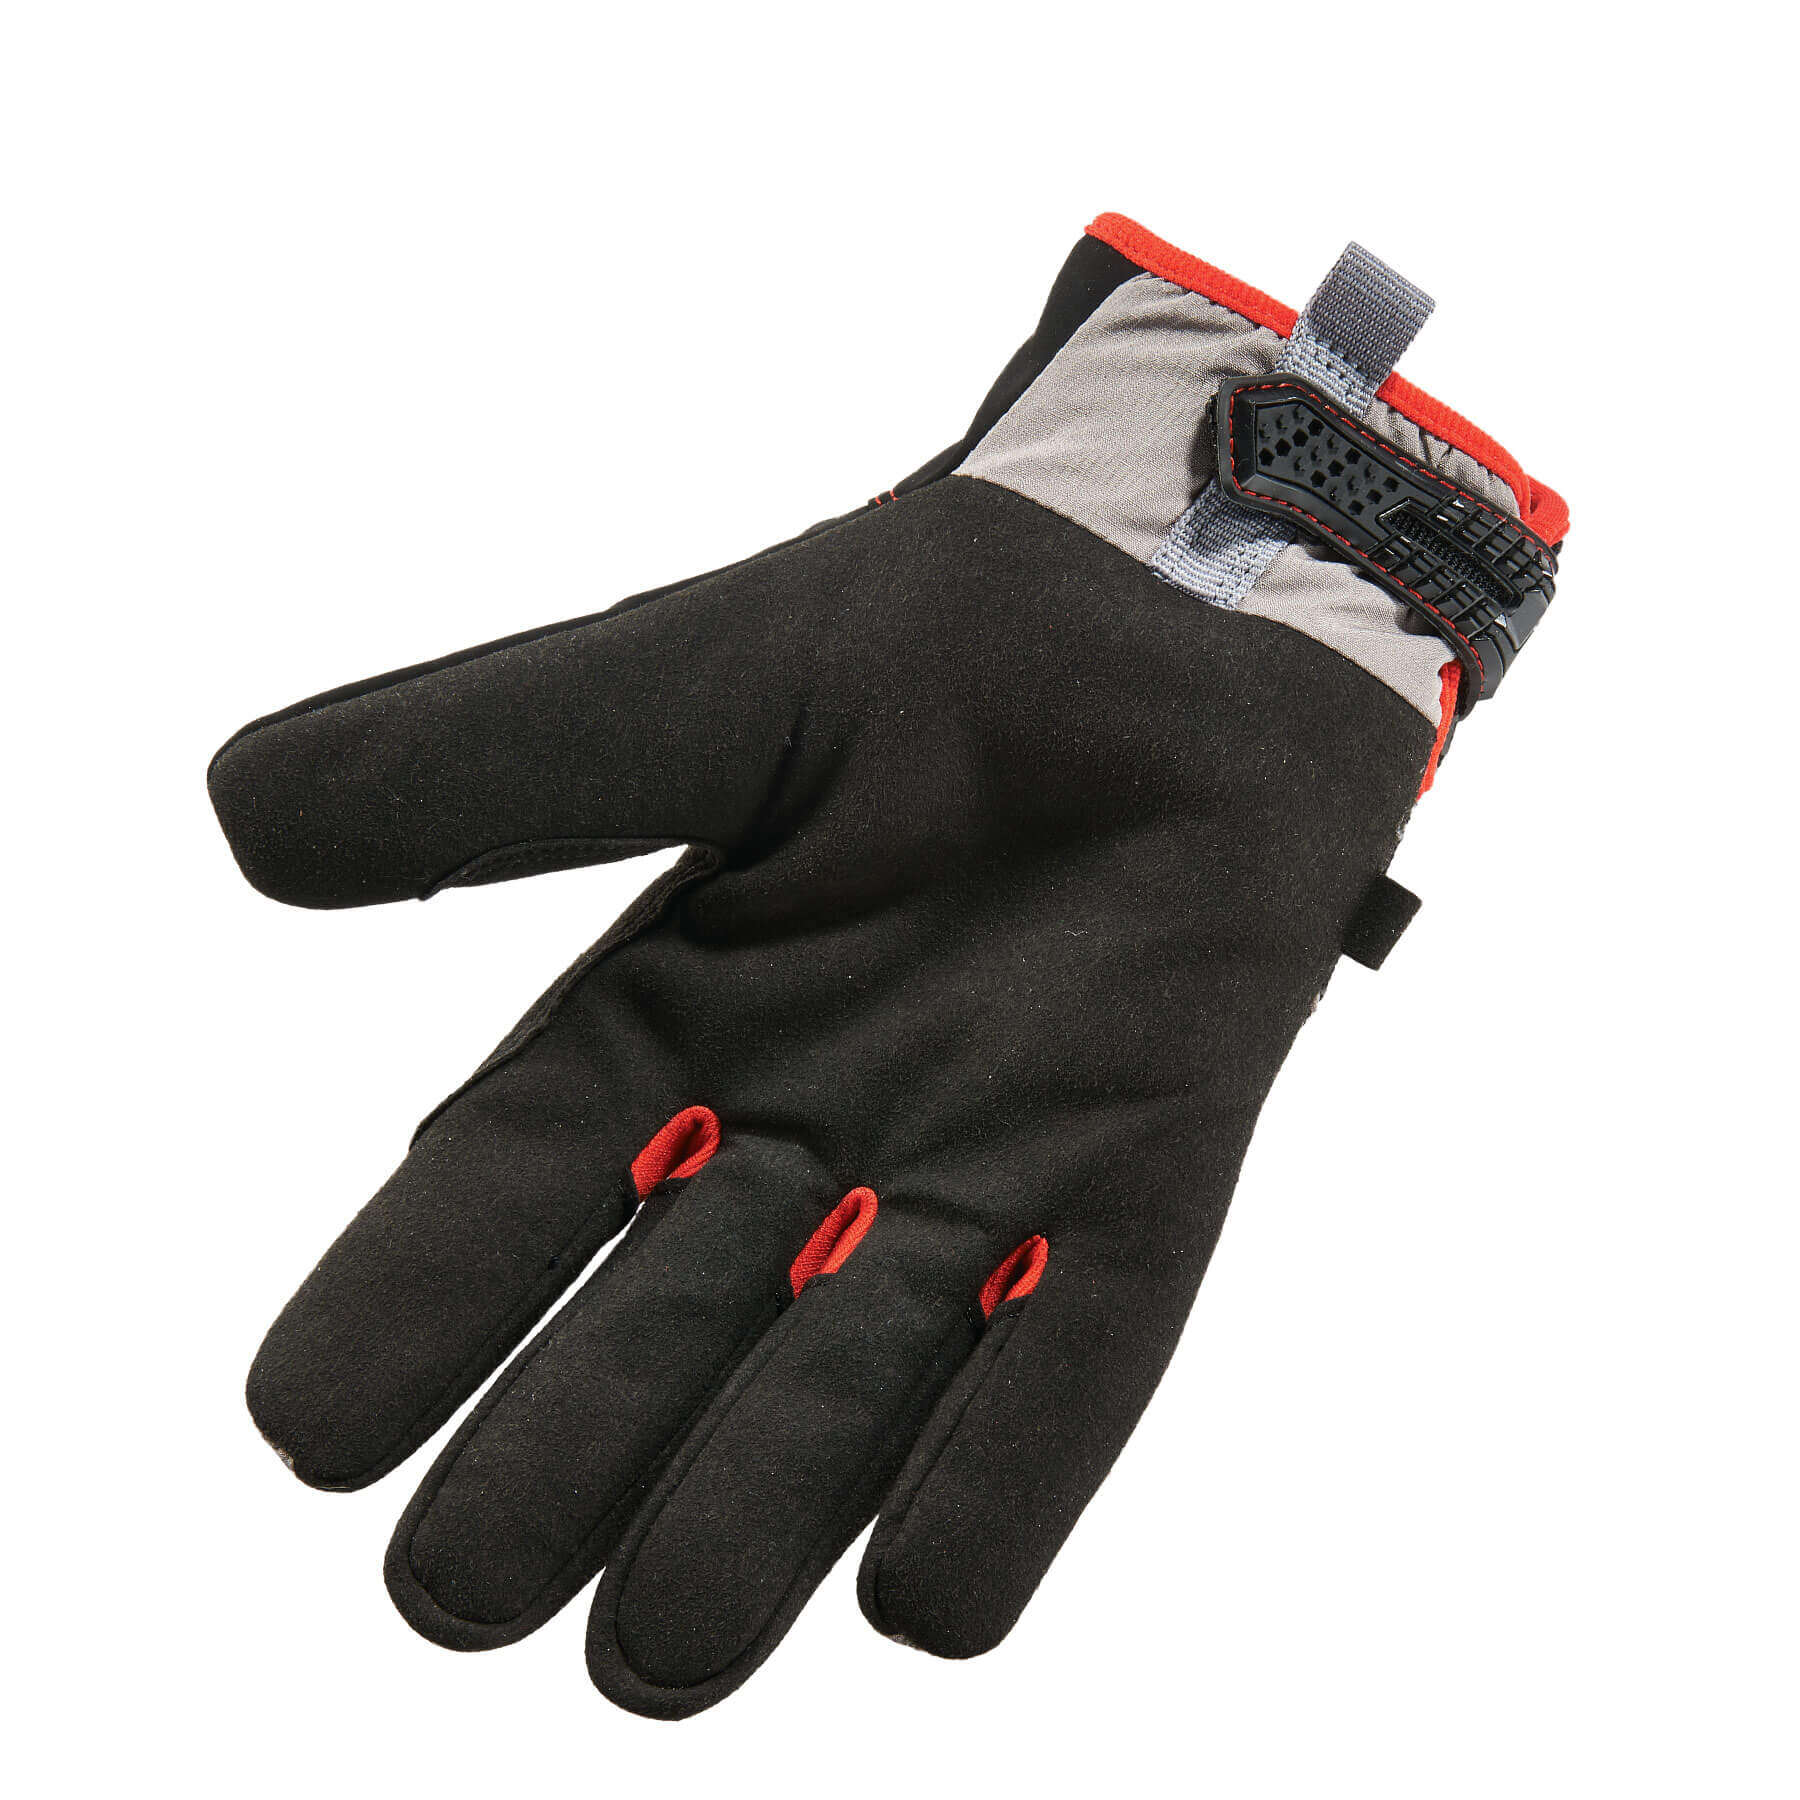 1Pair Electrician Work Gloves Protective Tool 400v Insulating